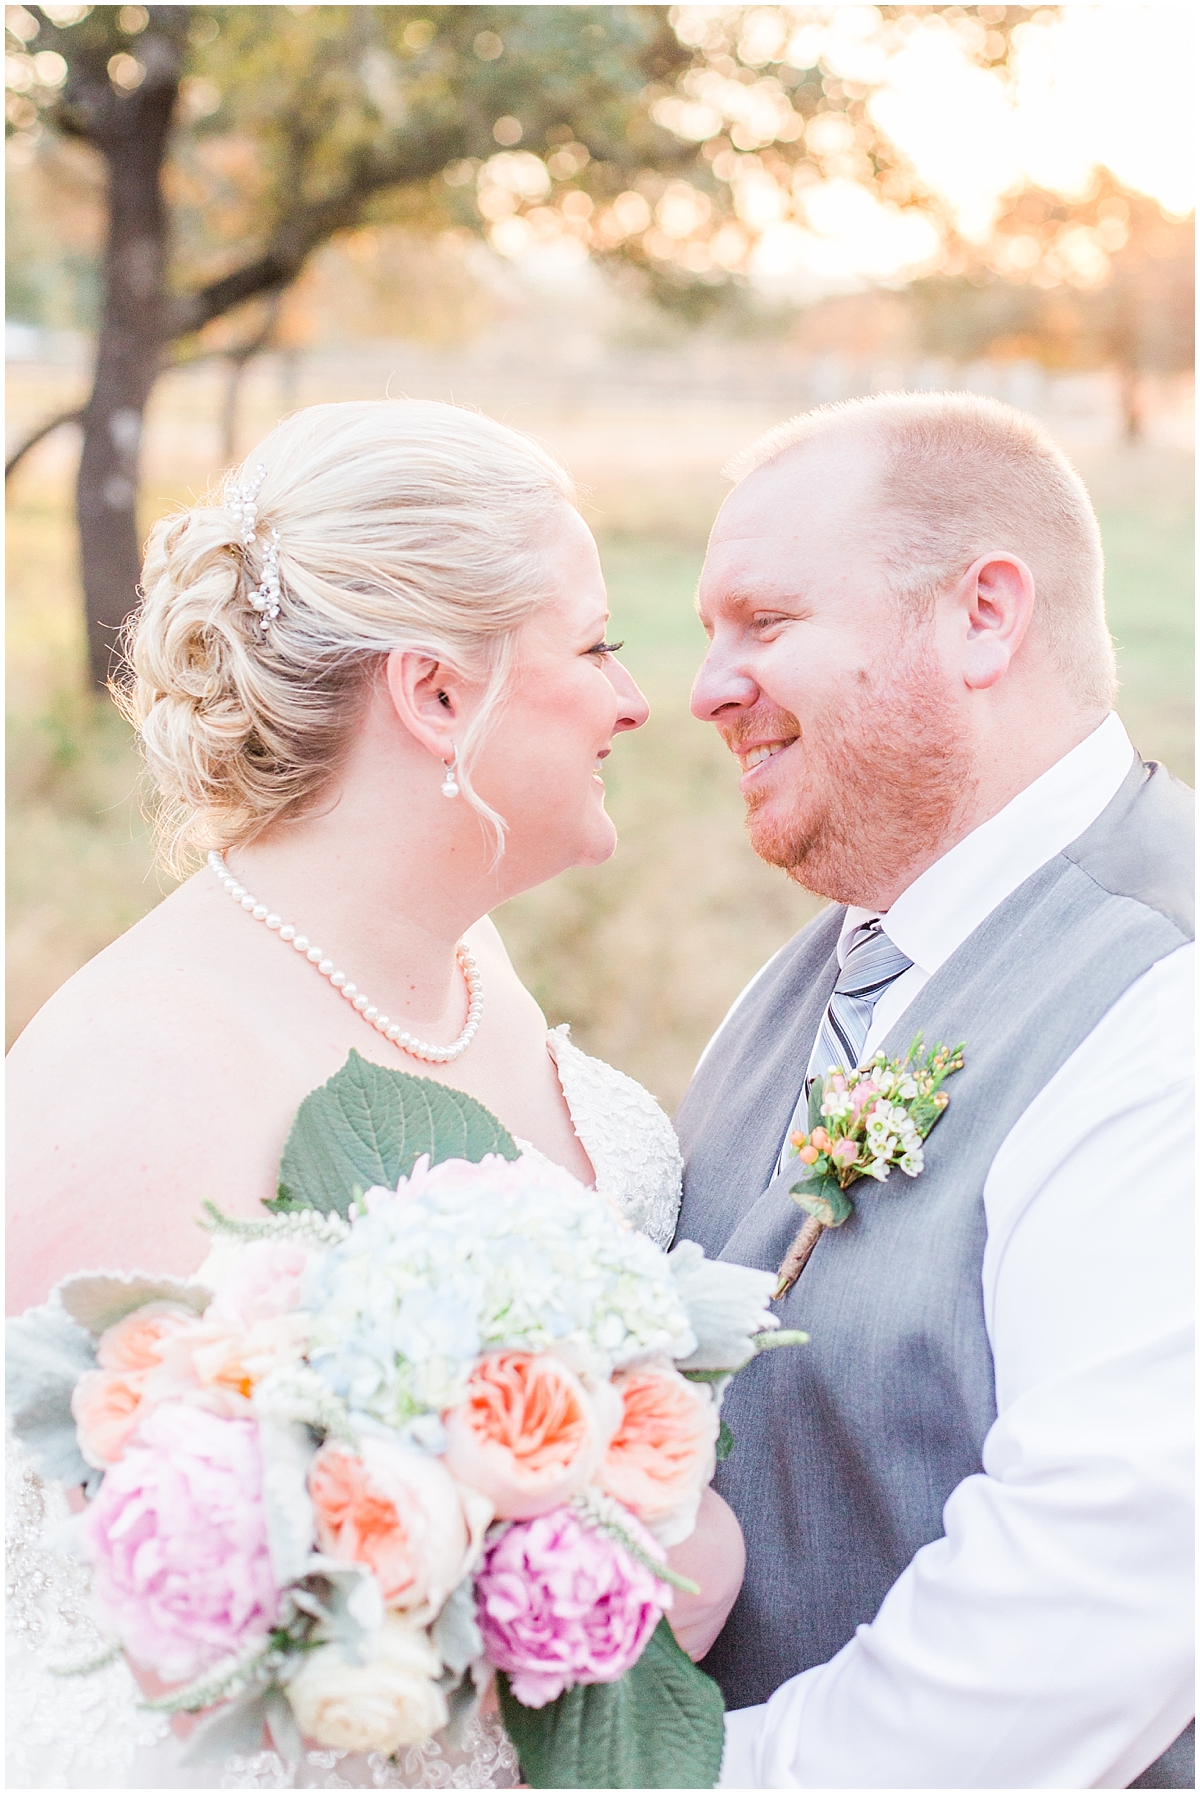 a-slate-blue-and-grey-winter-wedding-at-cw-hill-country-ranch-in-boerne-texas-by-allison-jeffers-wedding-photography_0093